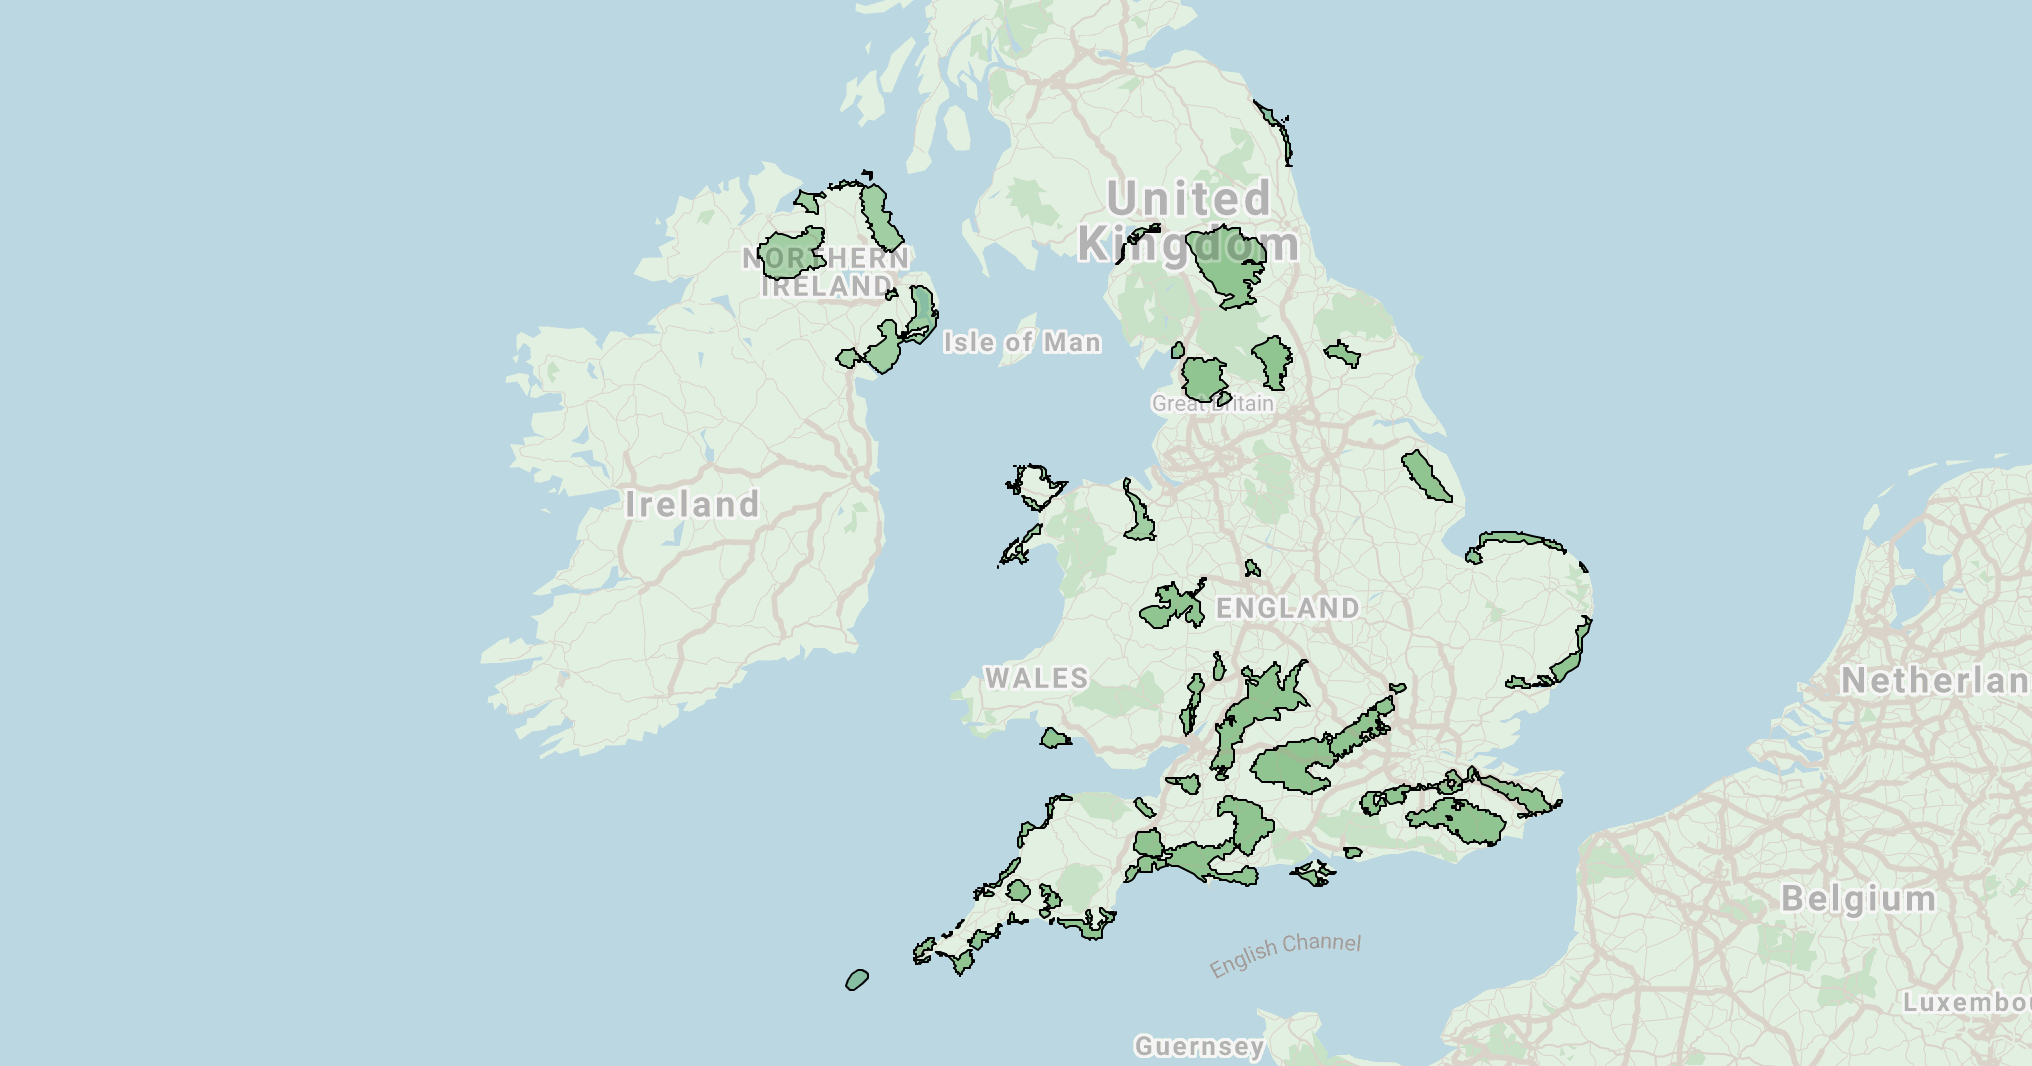 A screenshot of the fantastic AONBs map from the Google Maps page on Landscapes for Life.